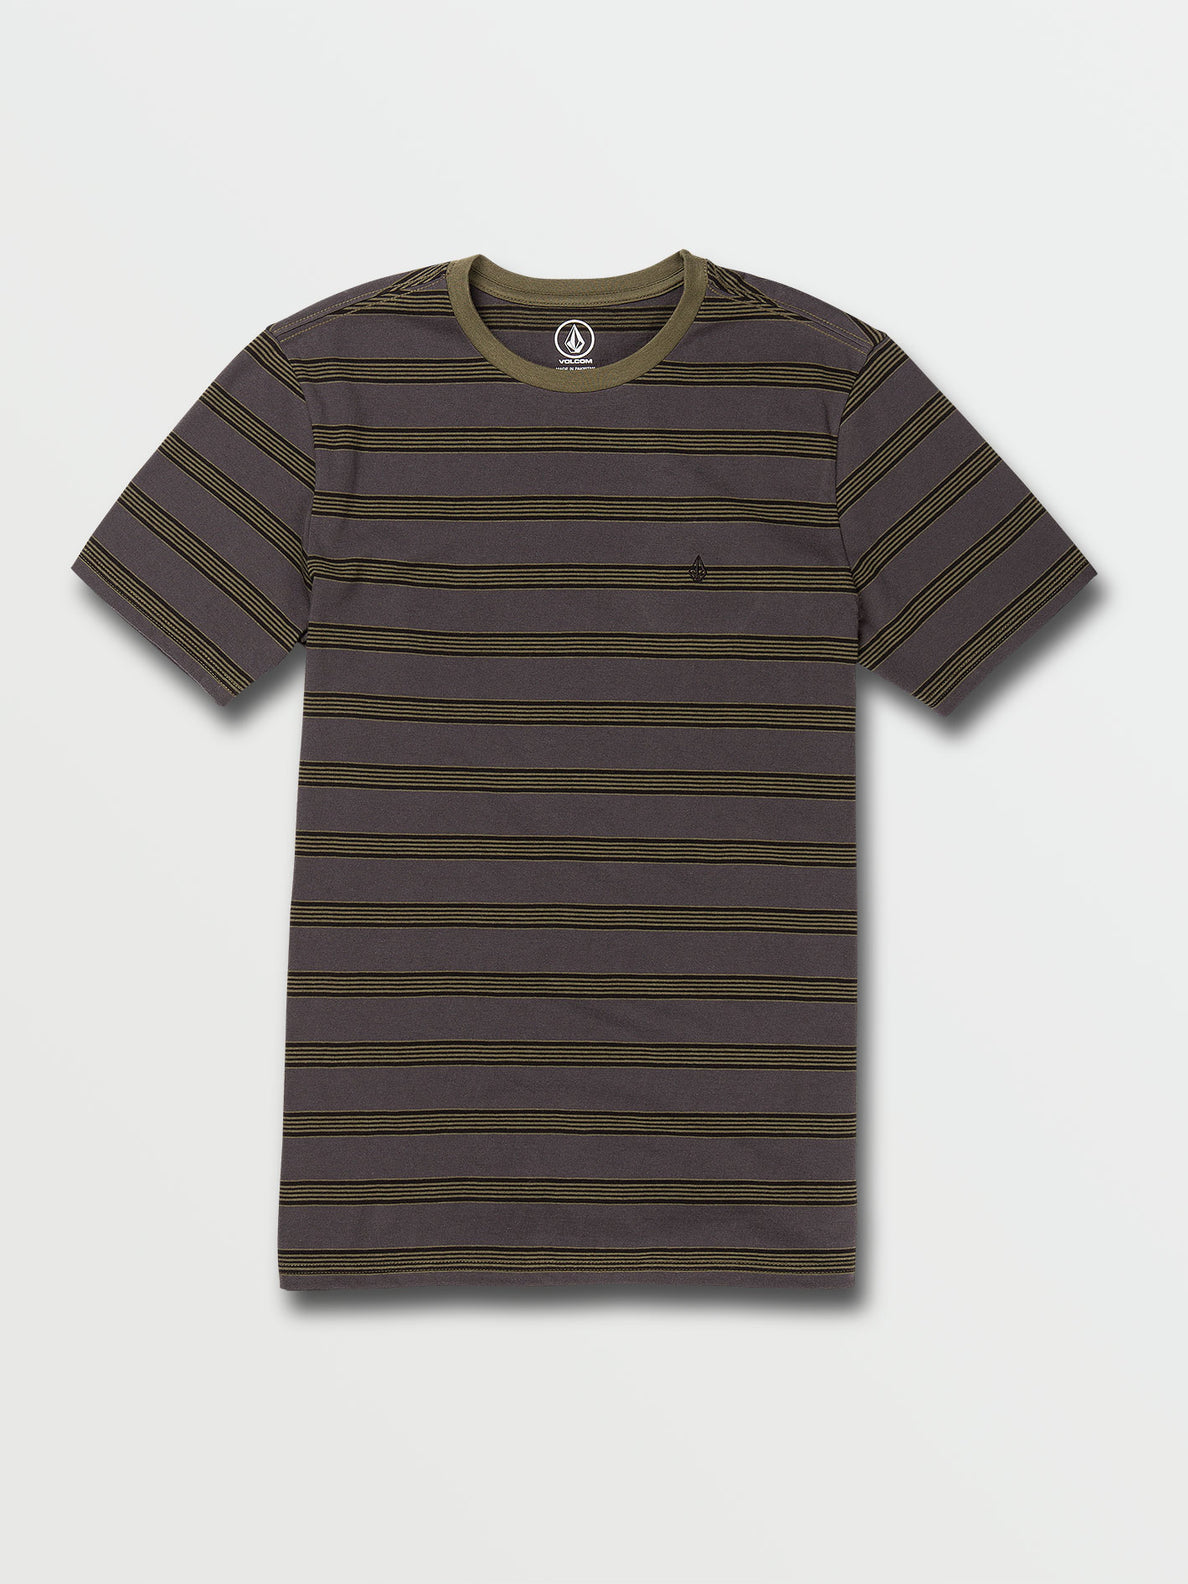 Parables Stripes Crew Tee - Military (A0102100_MIL) [F]